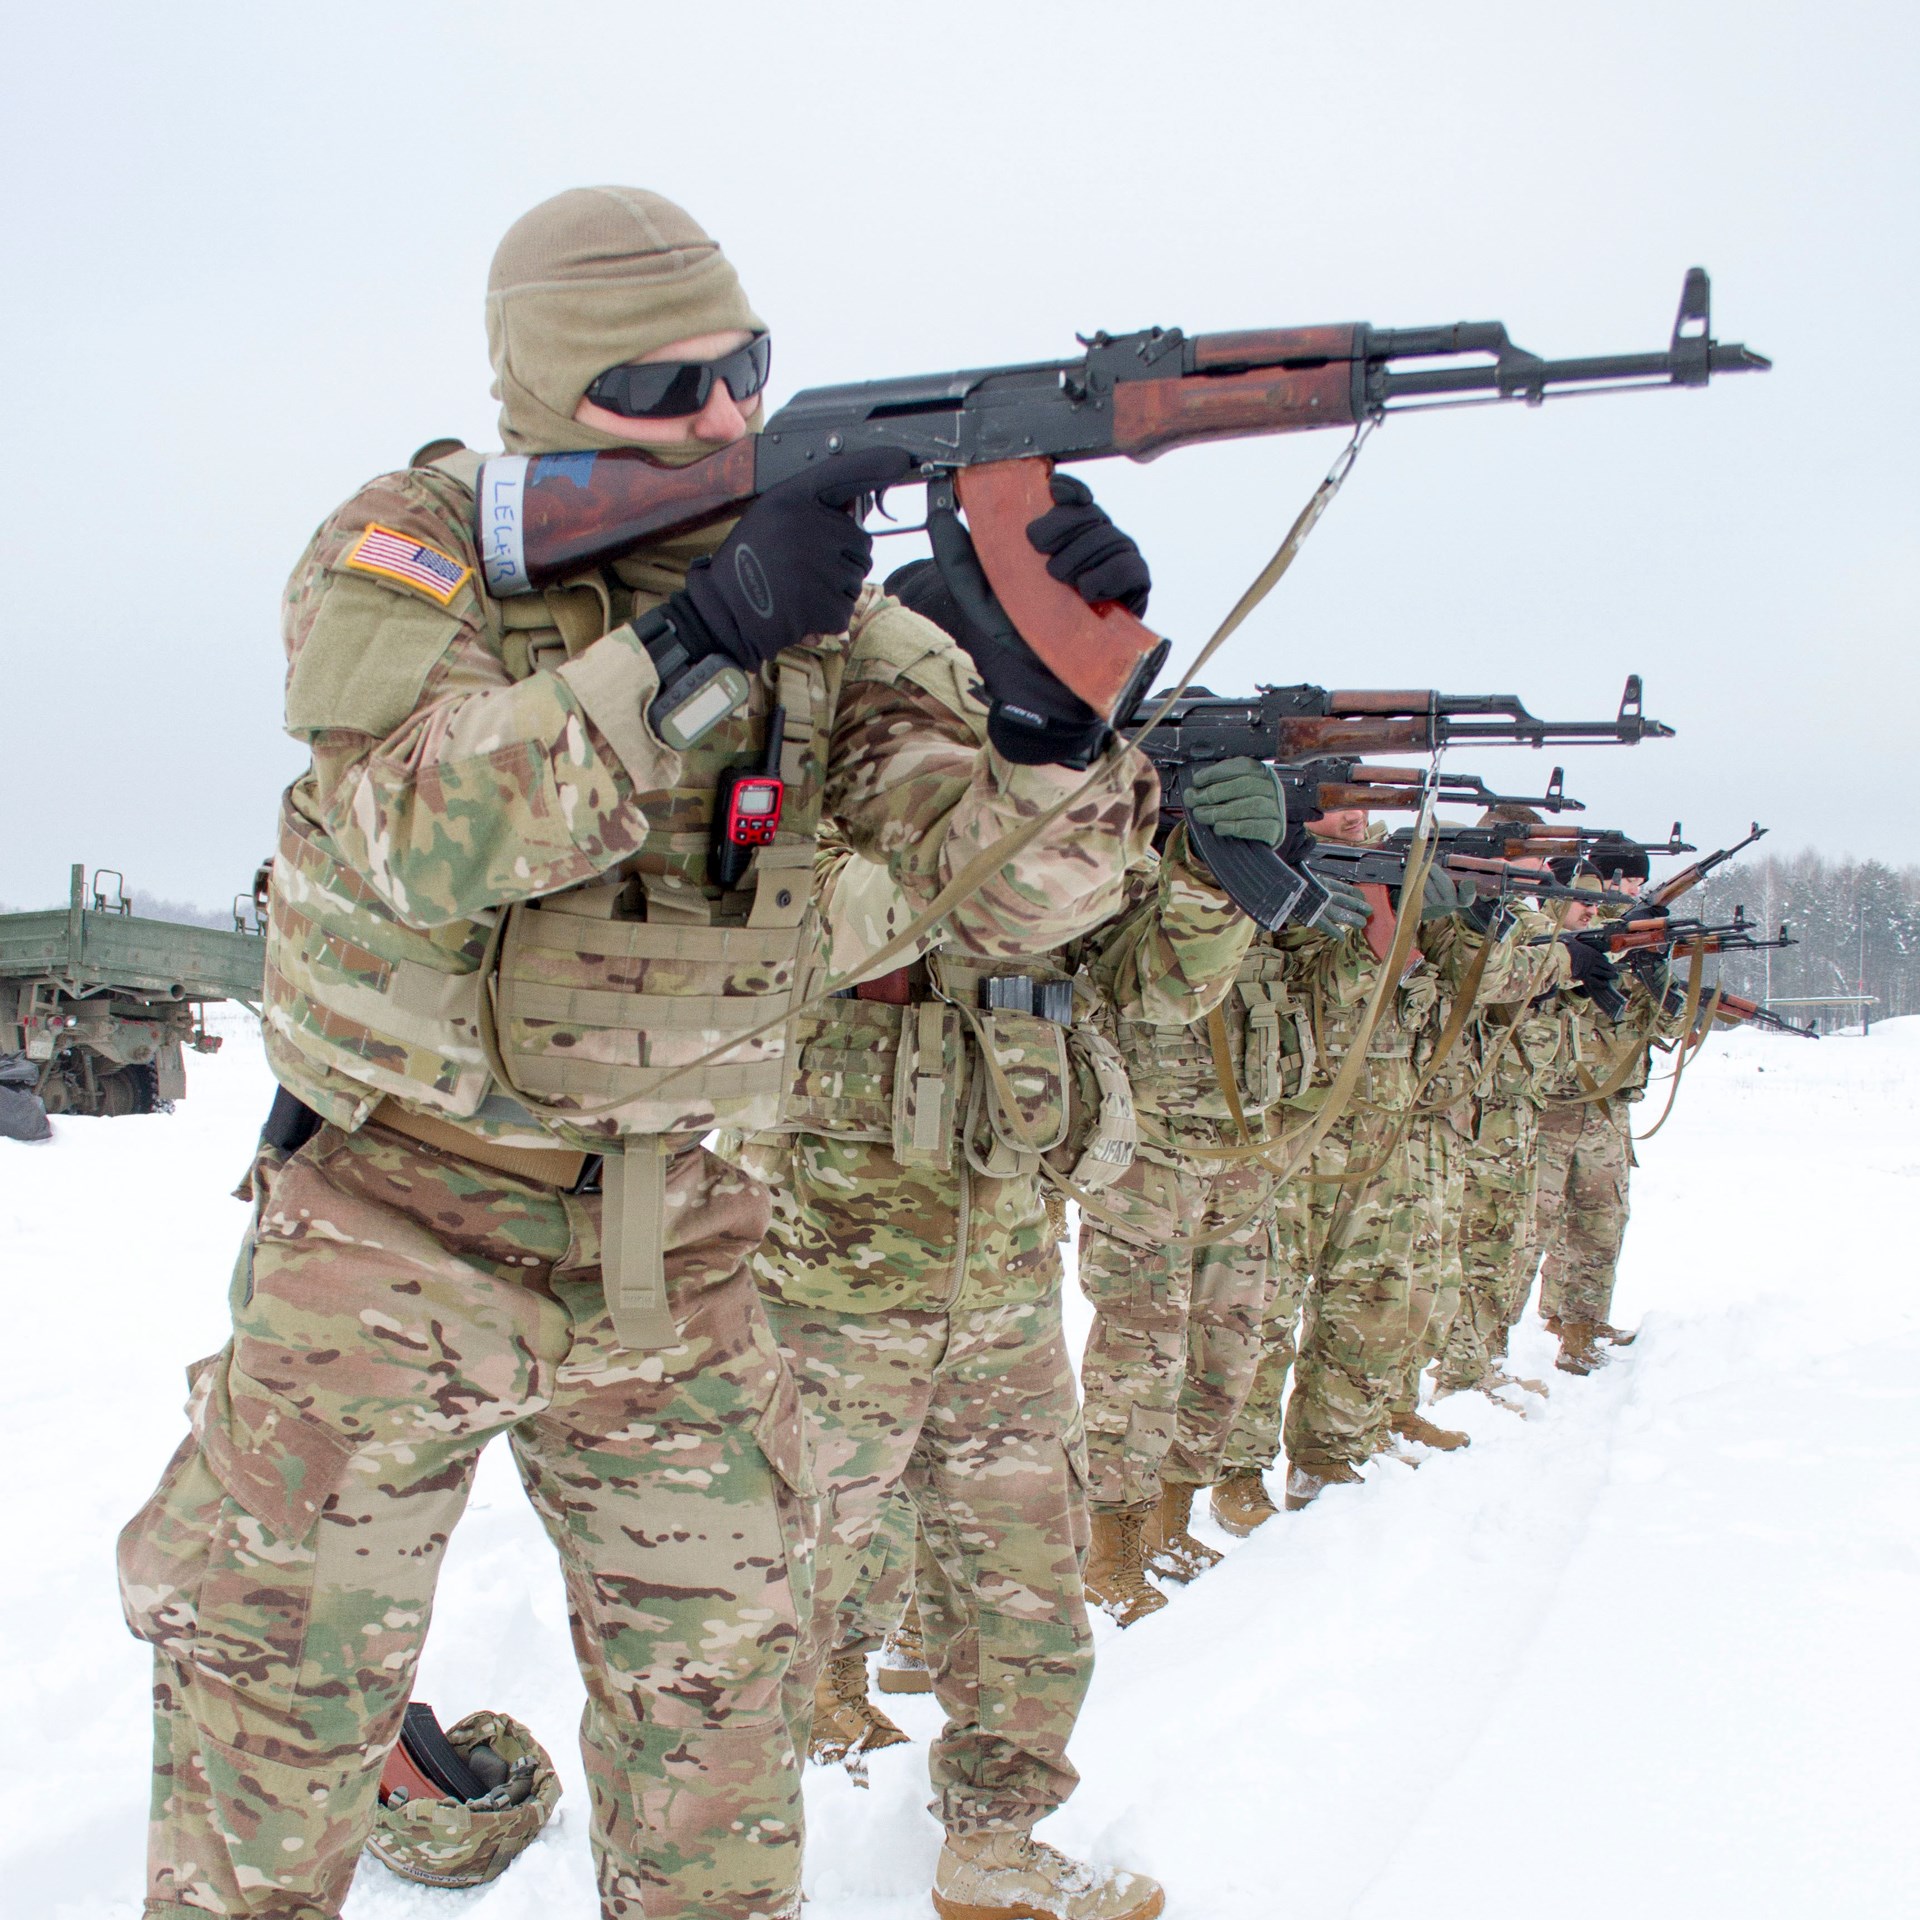 Soldiers of Company A, 1st Battalion, 179th Infantry Regiment, 45th Infantry Brigade Combat Team practice proper handling and reloading of the AKM rifle before firing it as part of instructor standardization training at the International Peacekeeping and Security Center, near Yavoriv, Ukraine, on January 19, 2017. (Photo by Sgt. Anthony Jones, 45th Infantry Brigade Combat Team)